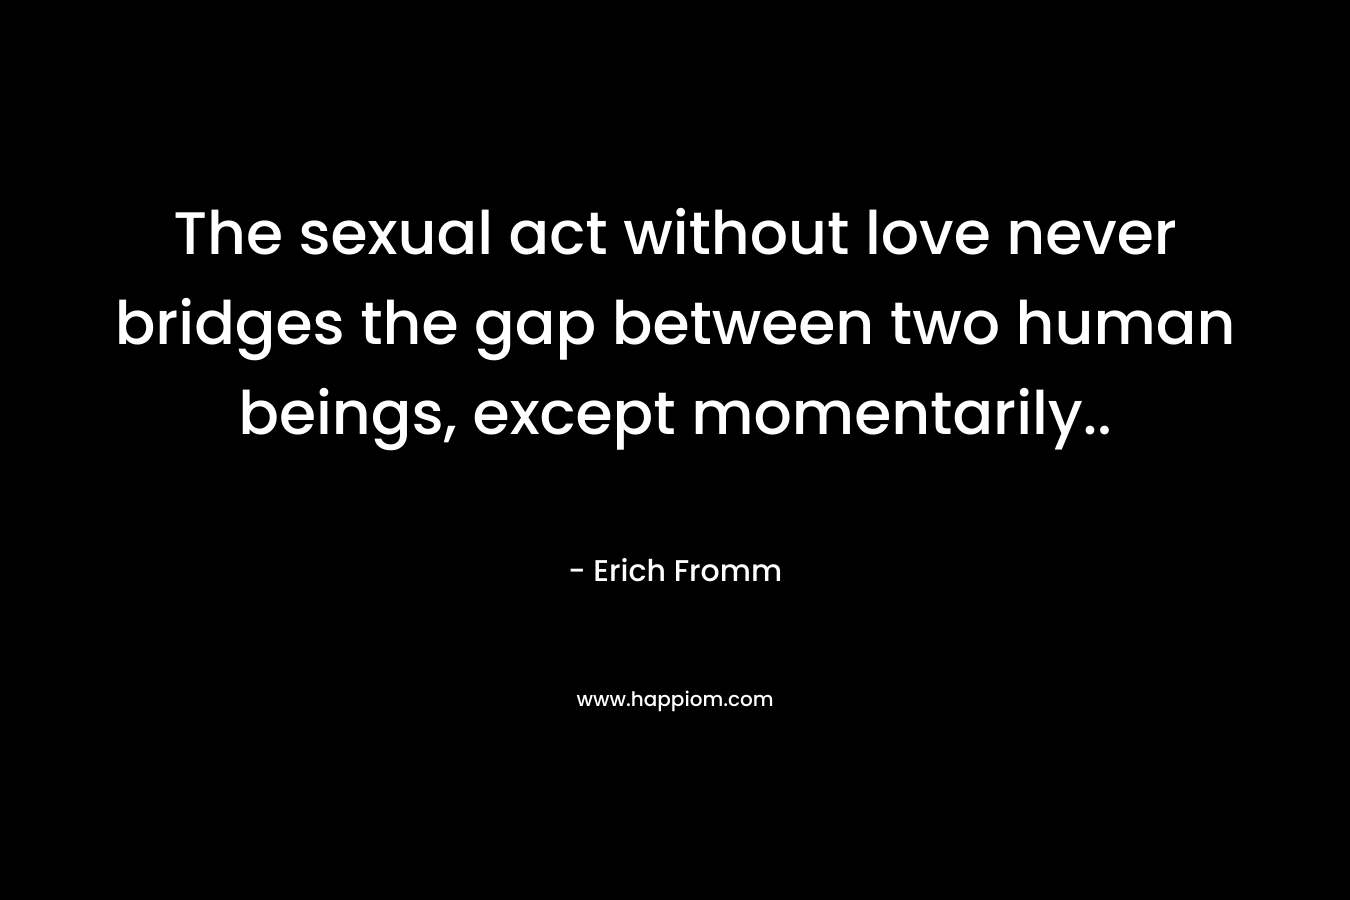 The sexual act without love never bridges the gap between two human beings, except momentarily..